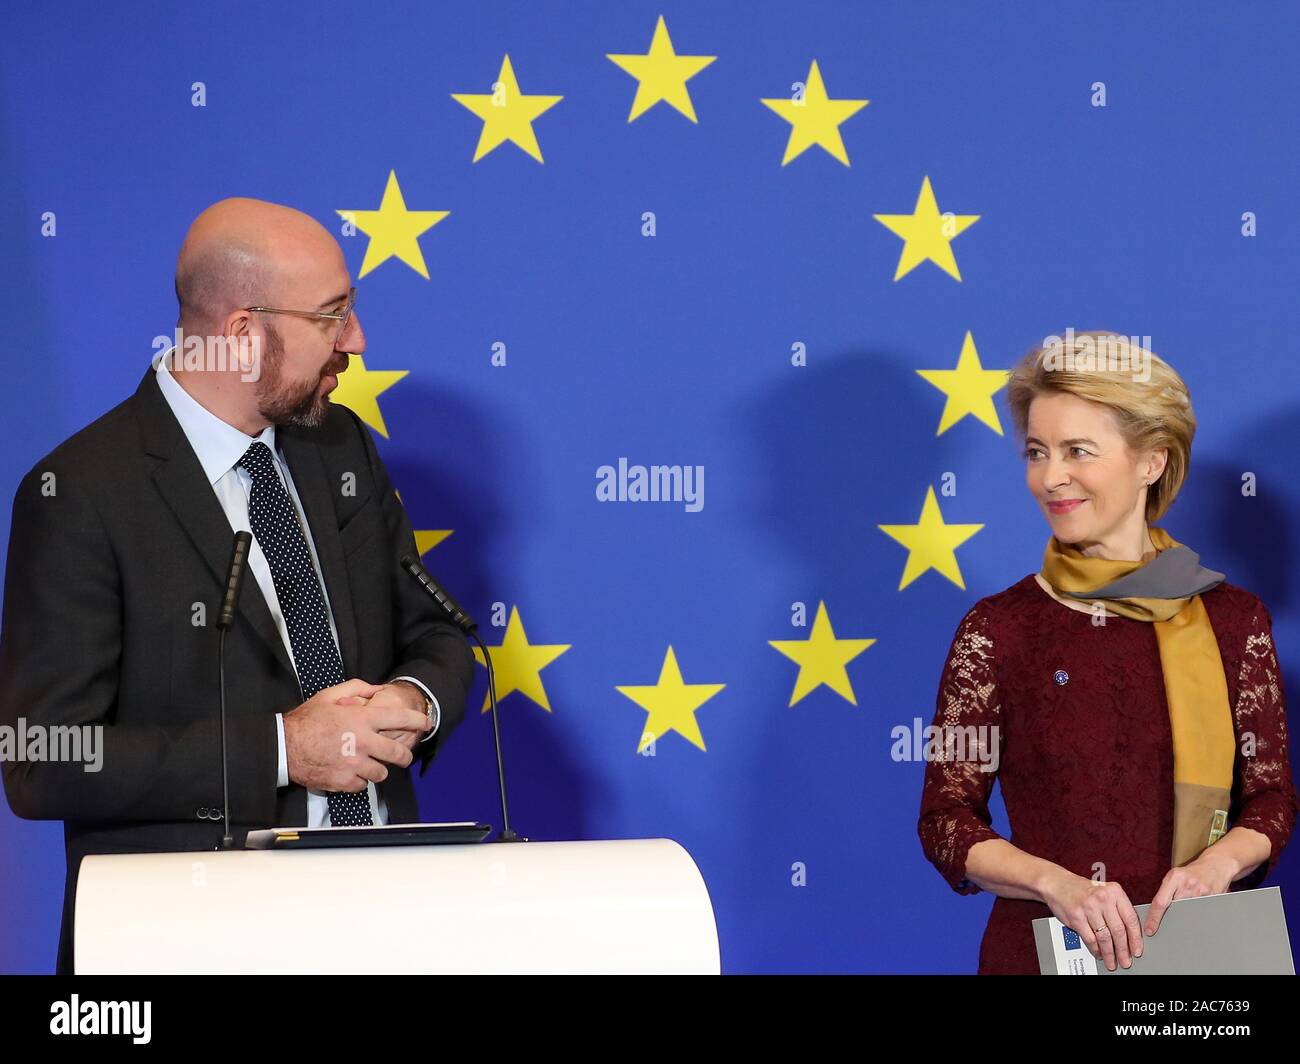 (191201) -- BRUSSELS, Dec. 1, 2019 (Xinhua) -- European Council President Charles Michel (L) and European Commission President Ursula von der Leyen attend a ceremony to mark the 10th anniversary of the entry into force of the Lisbon Treaty, at the House of European History in Brussels, Belgium, Dec. 1, 2019. (Xinhua/Zhang Cheng) Stock Photo